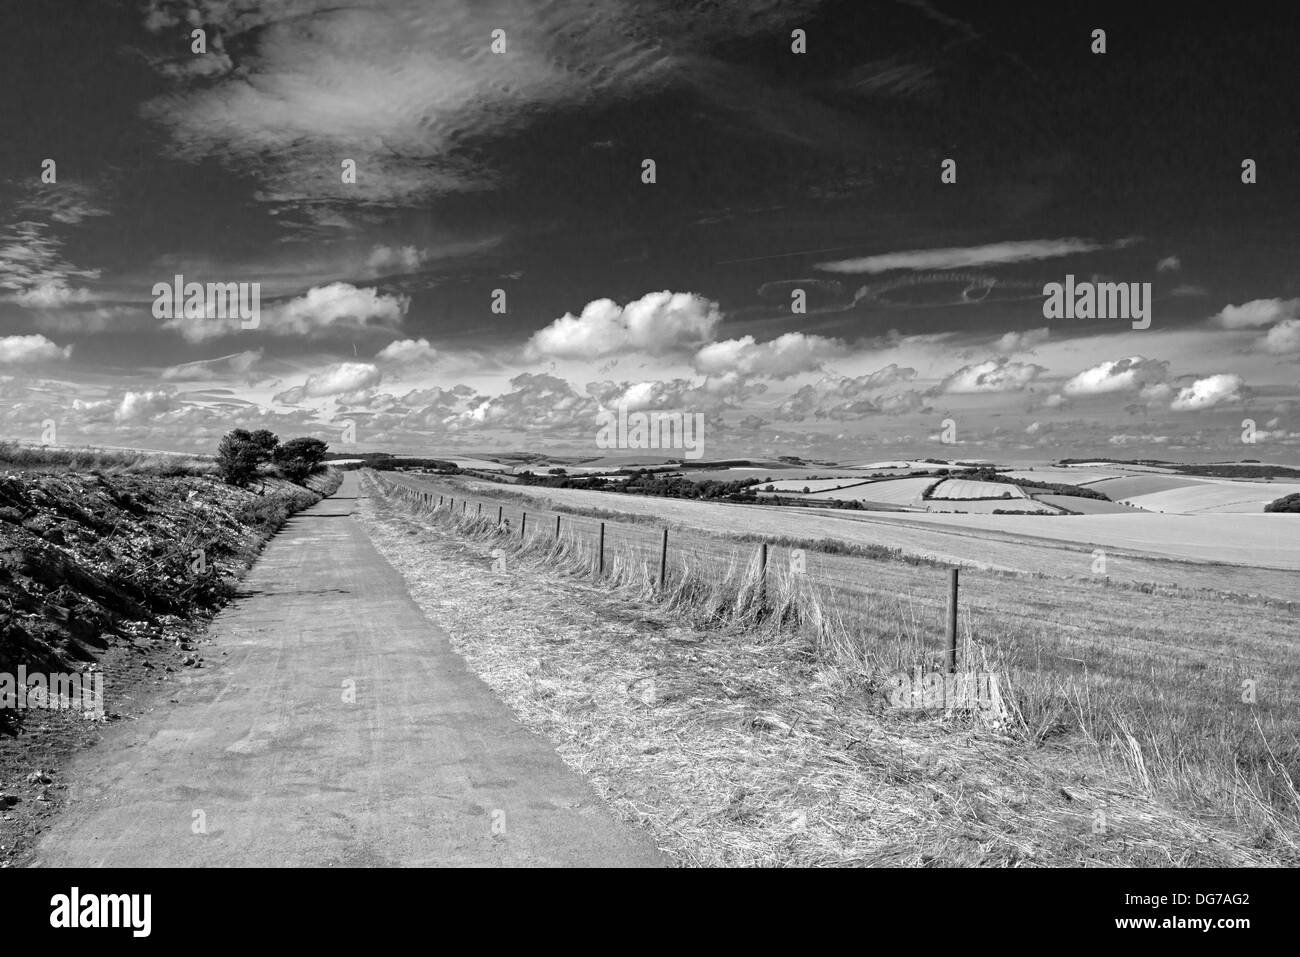 Landscape view of the South Downs, East Sussex on the B2123 near Woodingdean, Brighton, England, Uk (Black and white) Stock Photo